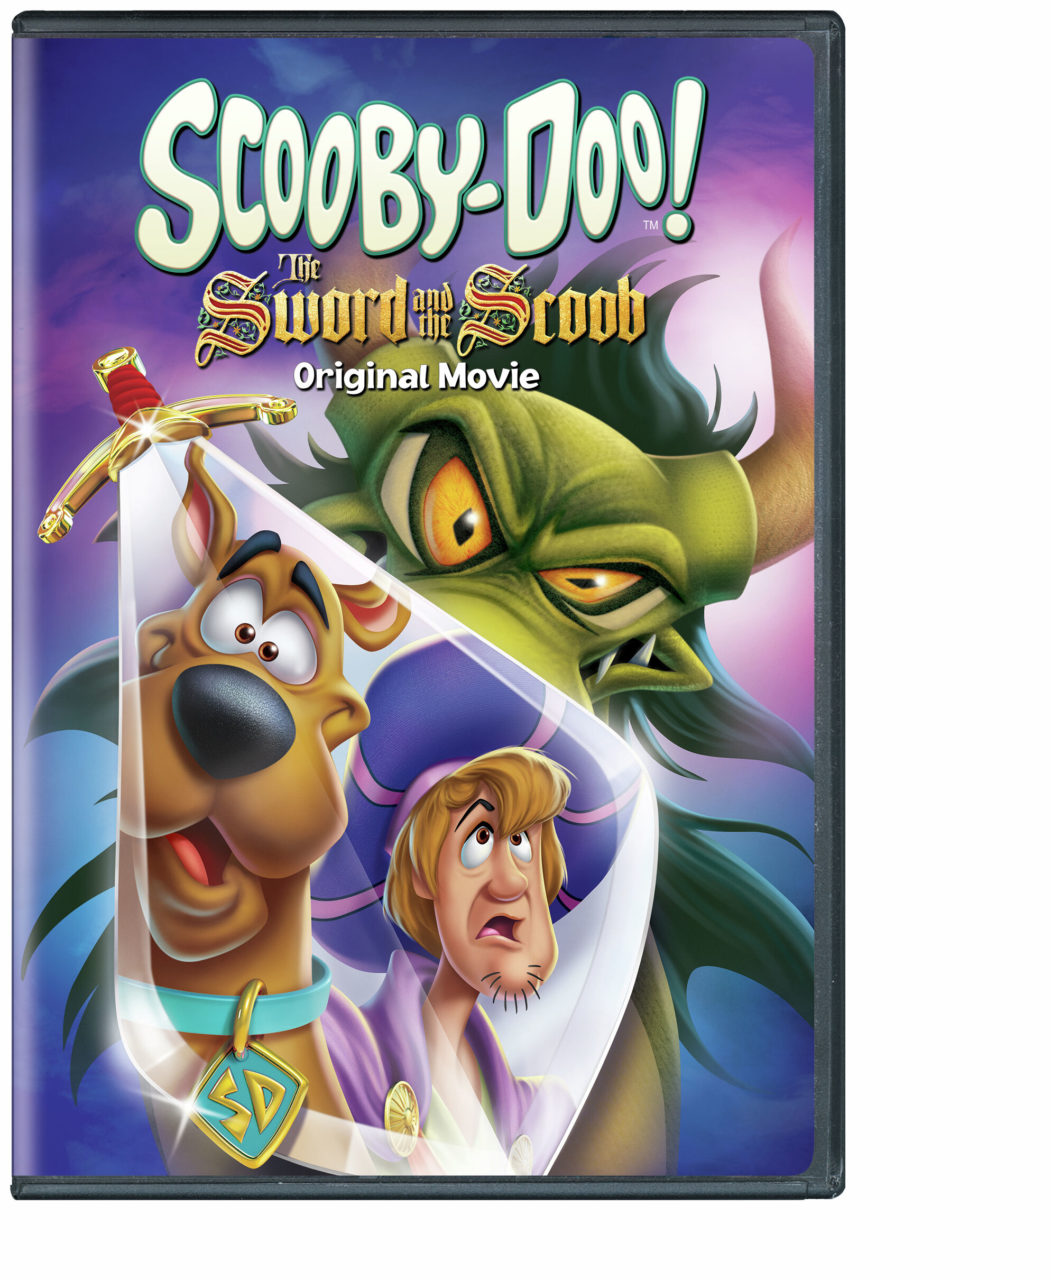 Scooby-Doo! The Sword And The Scoob DVD cover (Warner Bros. Home Entertainment)